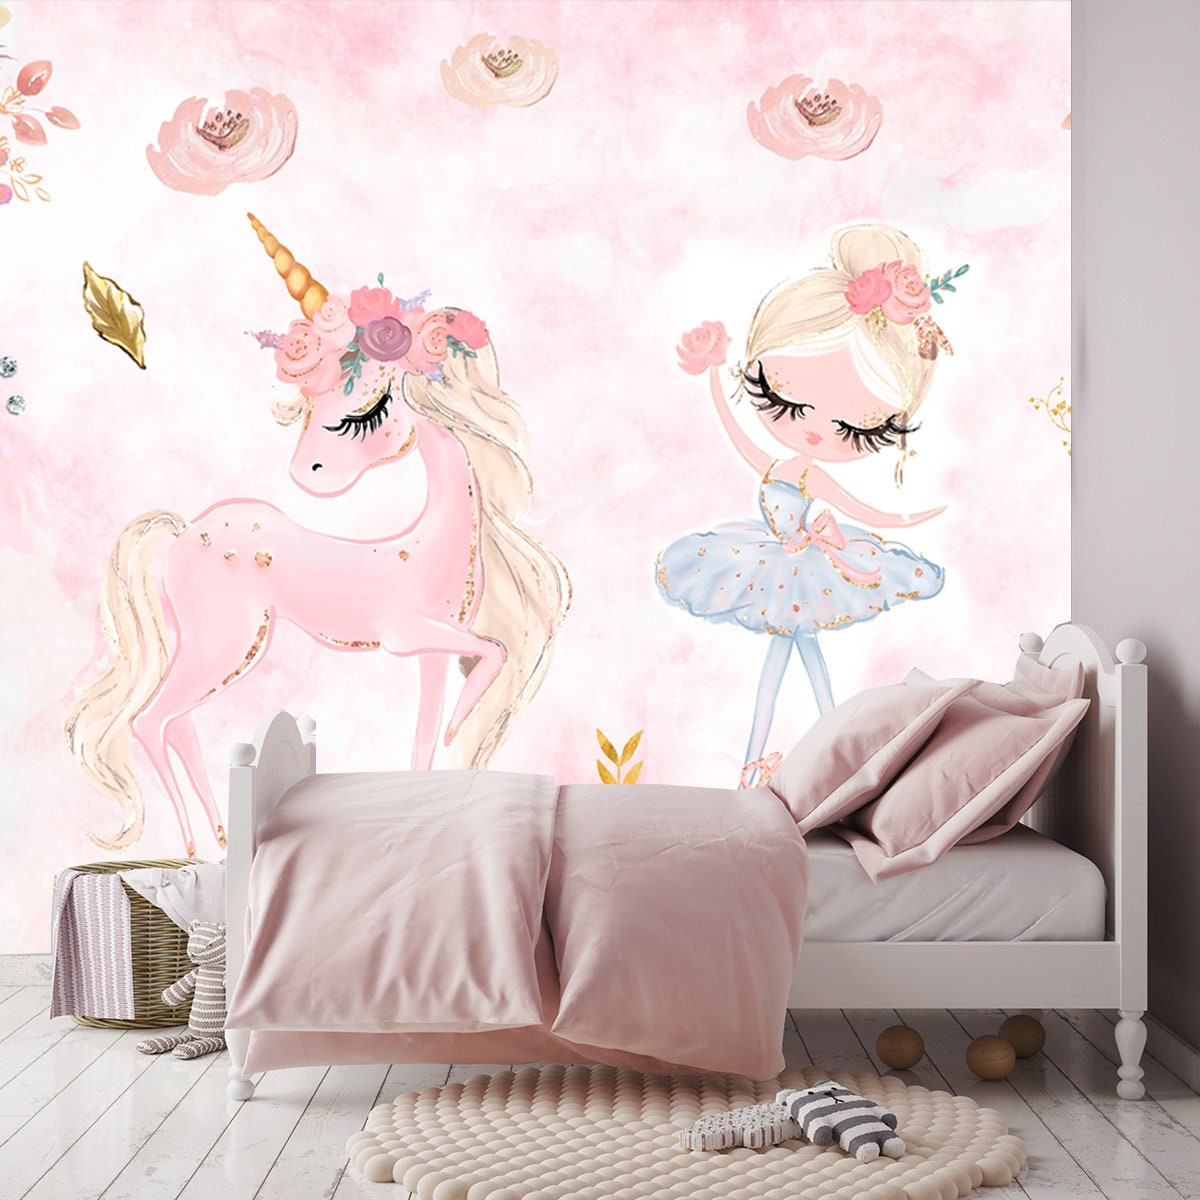 Unicorn and a Ballerina Princess on a Floral Background Wallpaper Girl Bedroom Mural